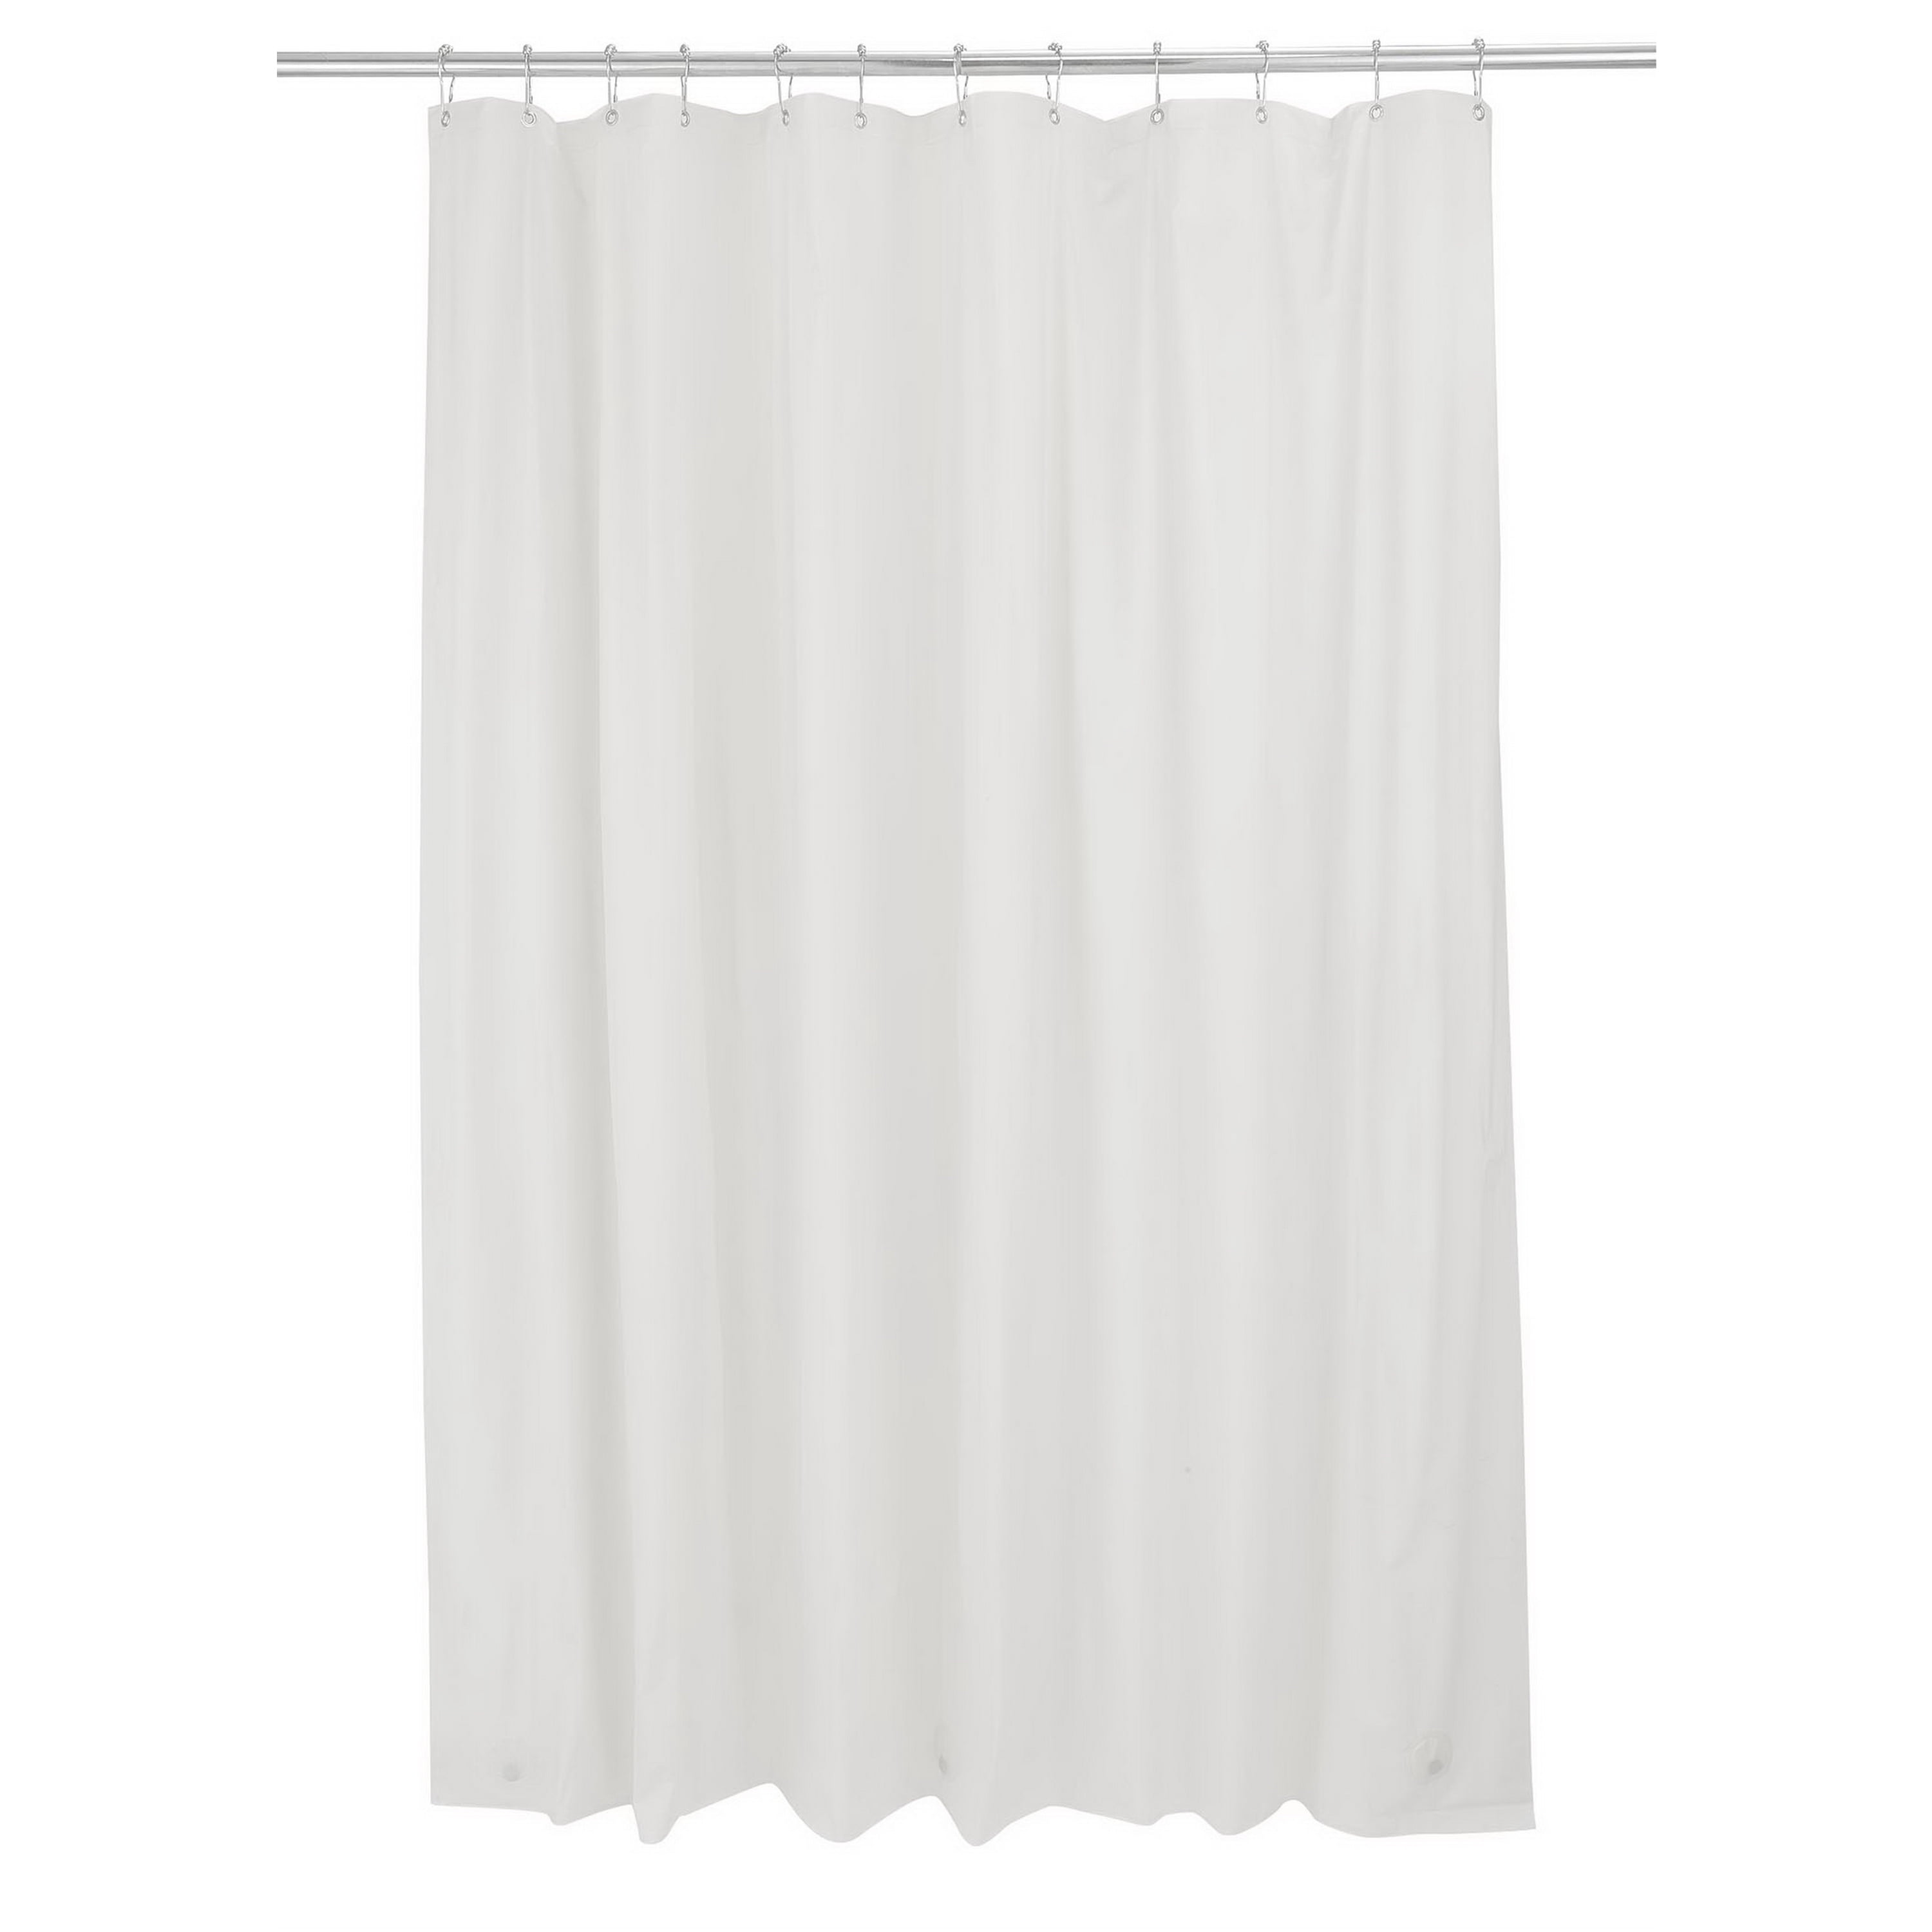 InterDesign X-Long Shower Curtain Liner in Clear  RL1507 72" x 96" New 